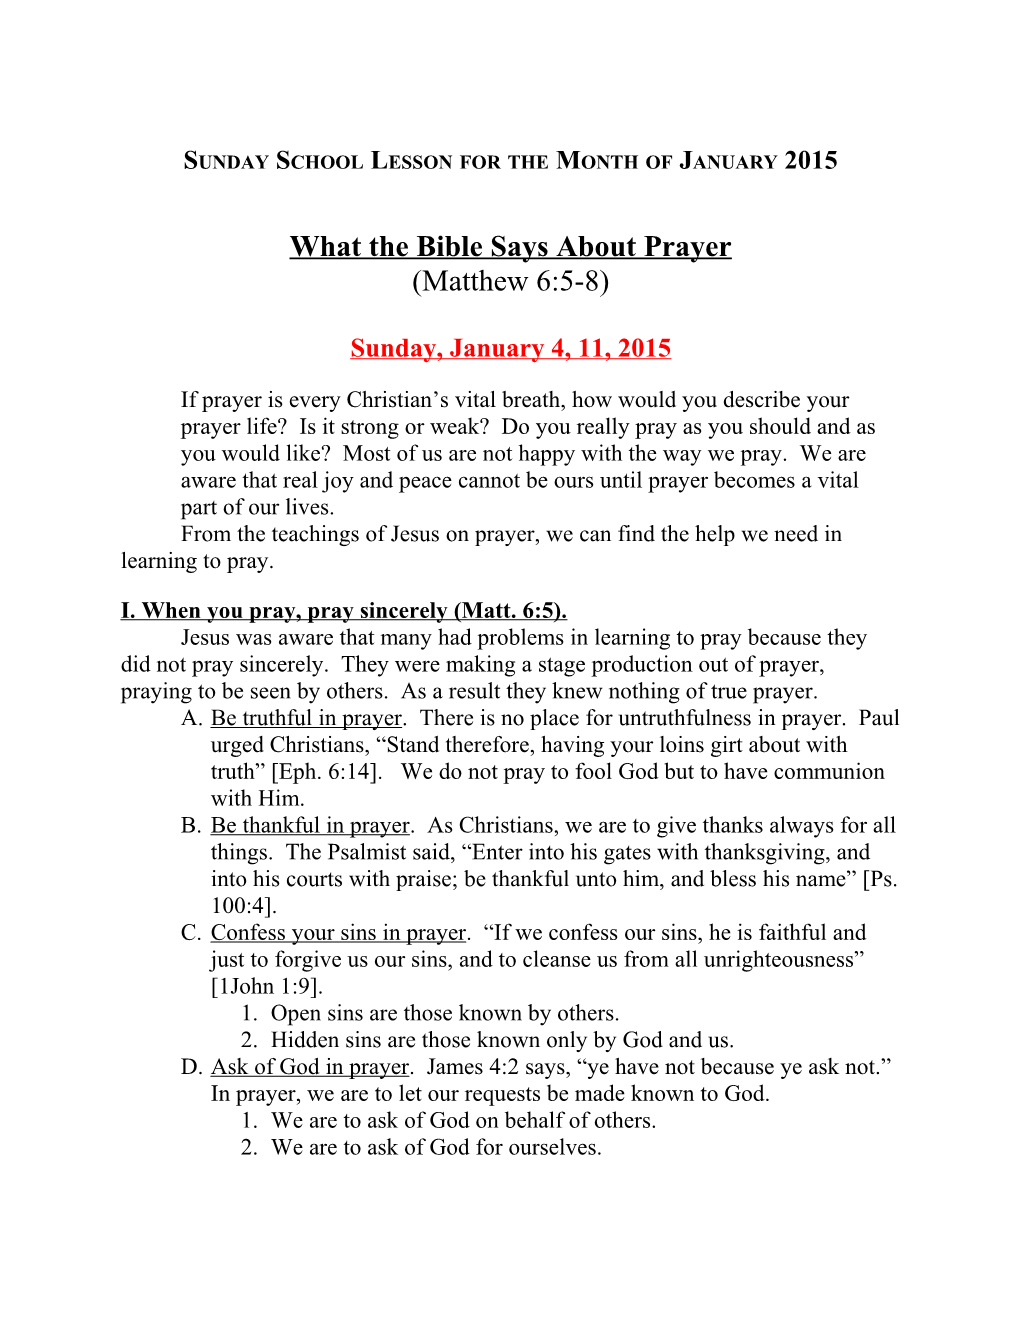 Sunday School Lesson for the Month of January 2015